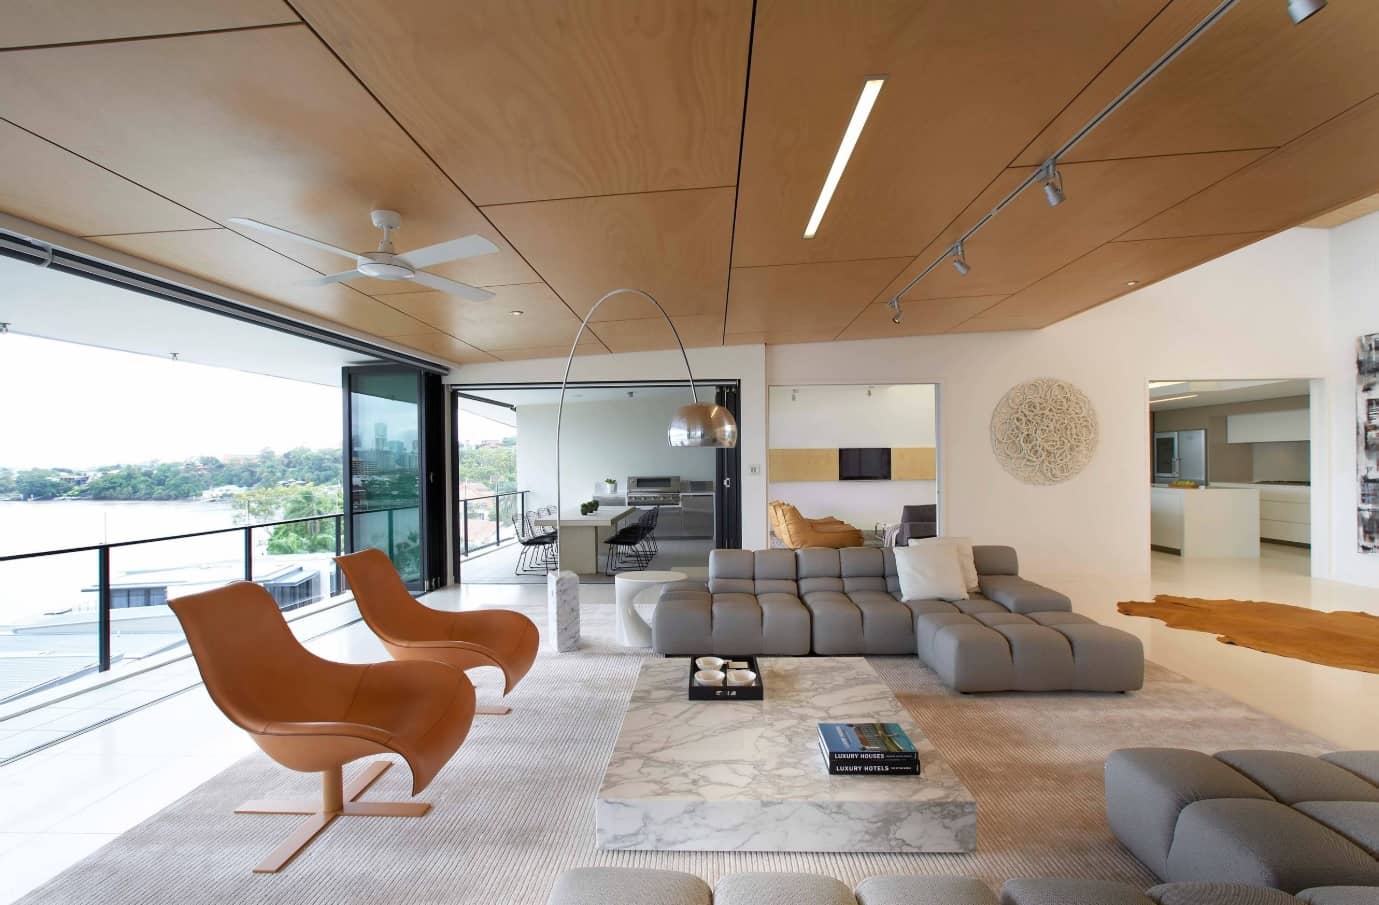 12 Ways You Could Make Your Home More Eco Friendly. Unusual designed modern living room with paneled ceiling, modular sofa, relaxing chairs and marble imitating stand as the coffee table